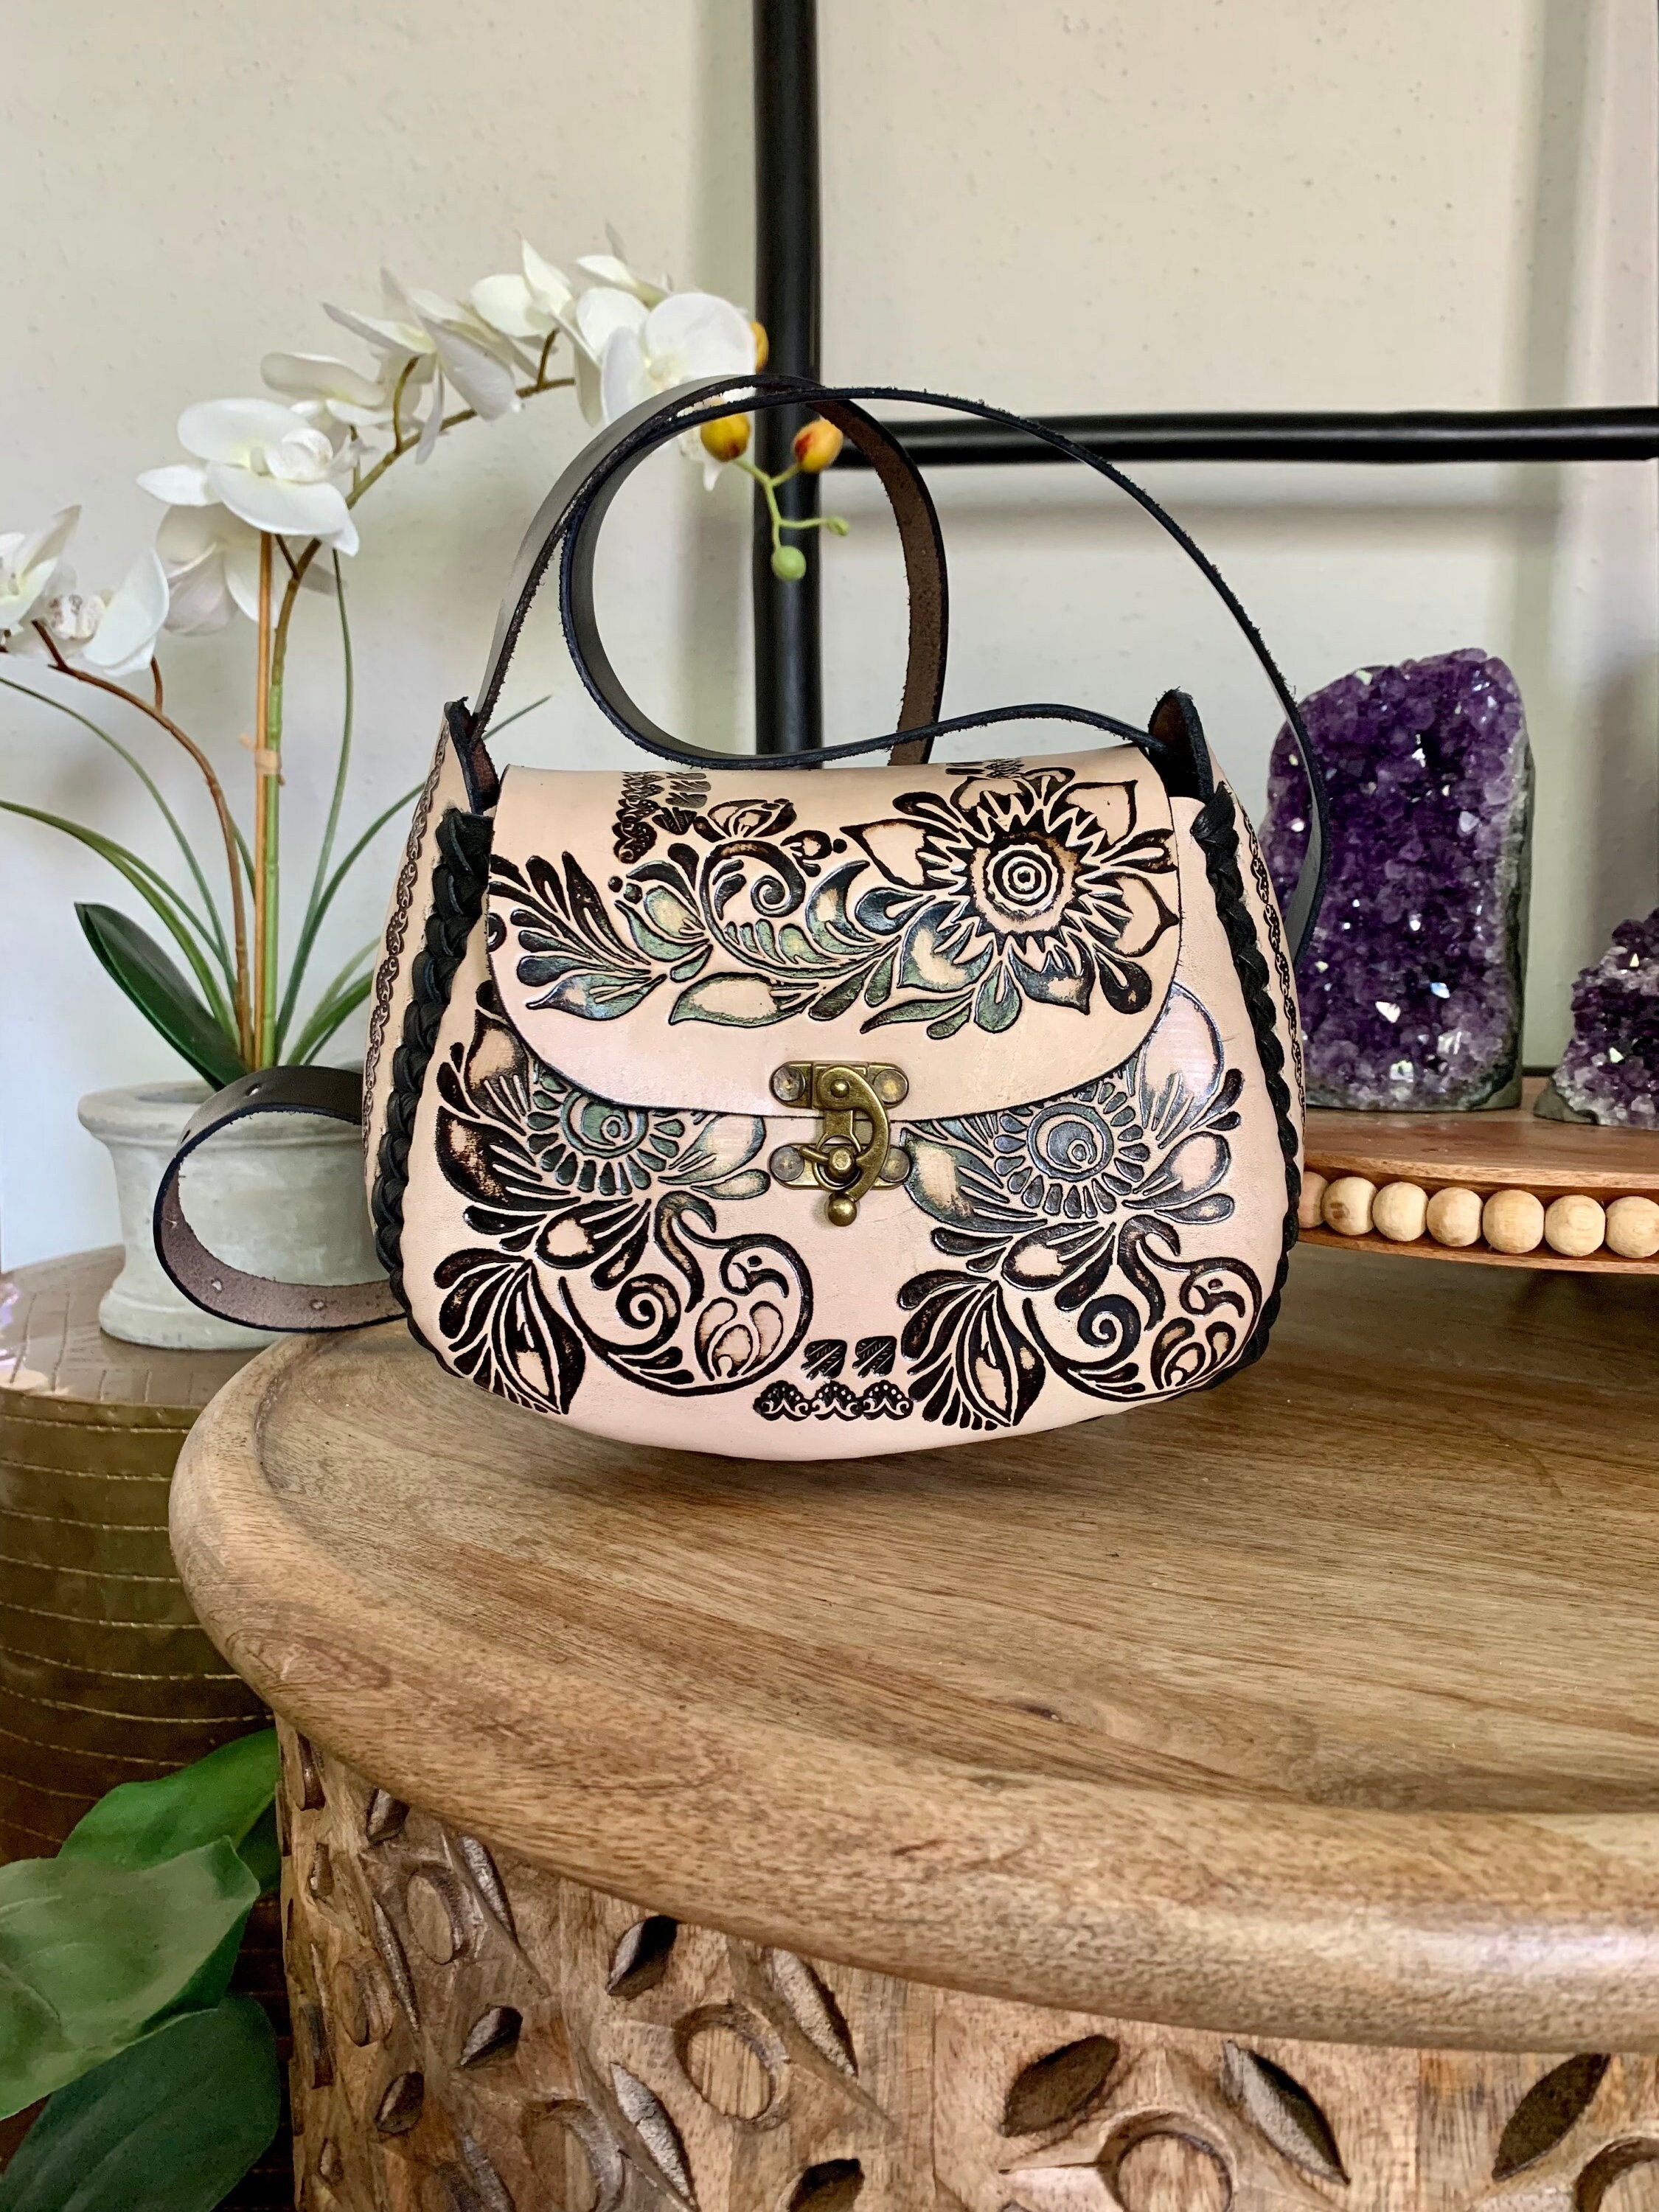 Christian Siriano | Bags | Floral Christian Siriano Purse With Removable  Strap | Poshmark